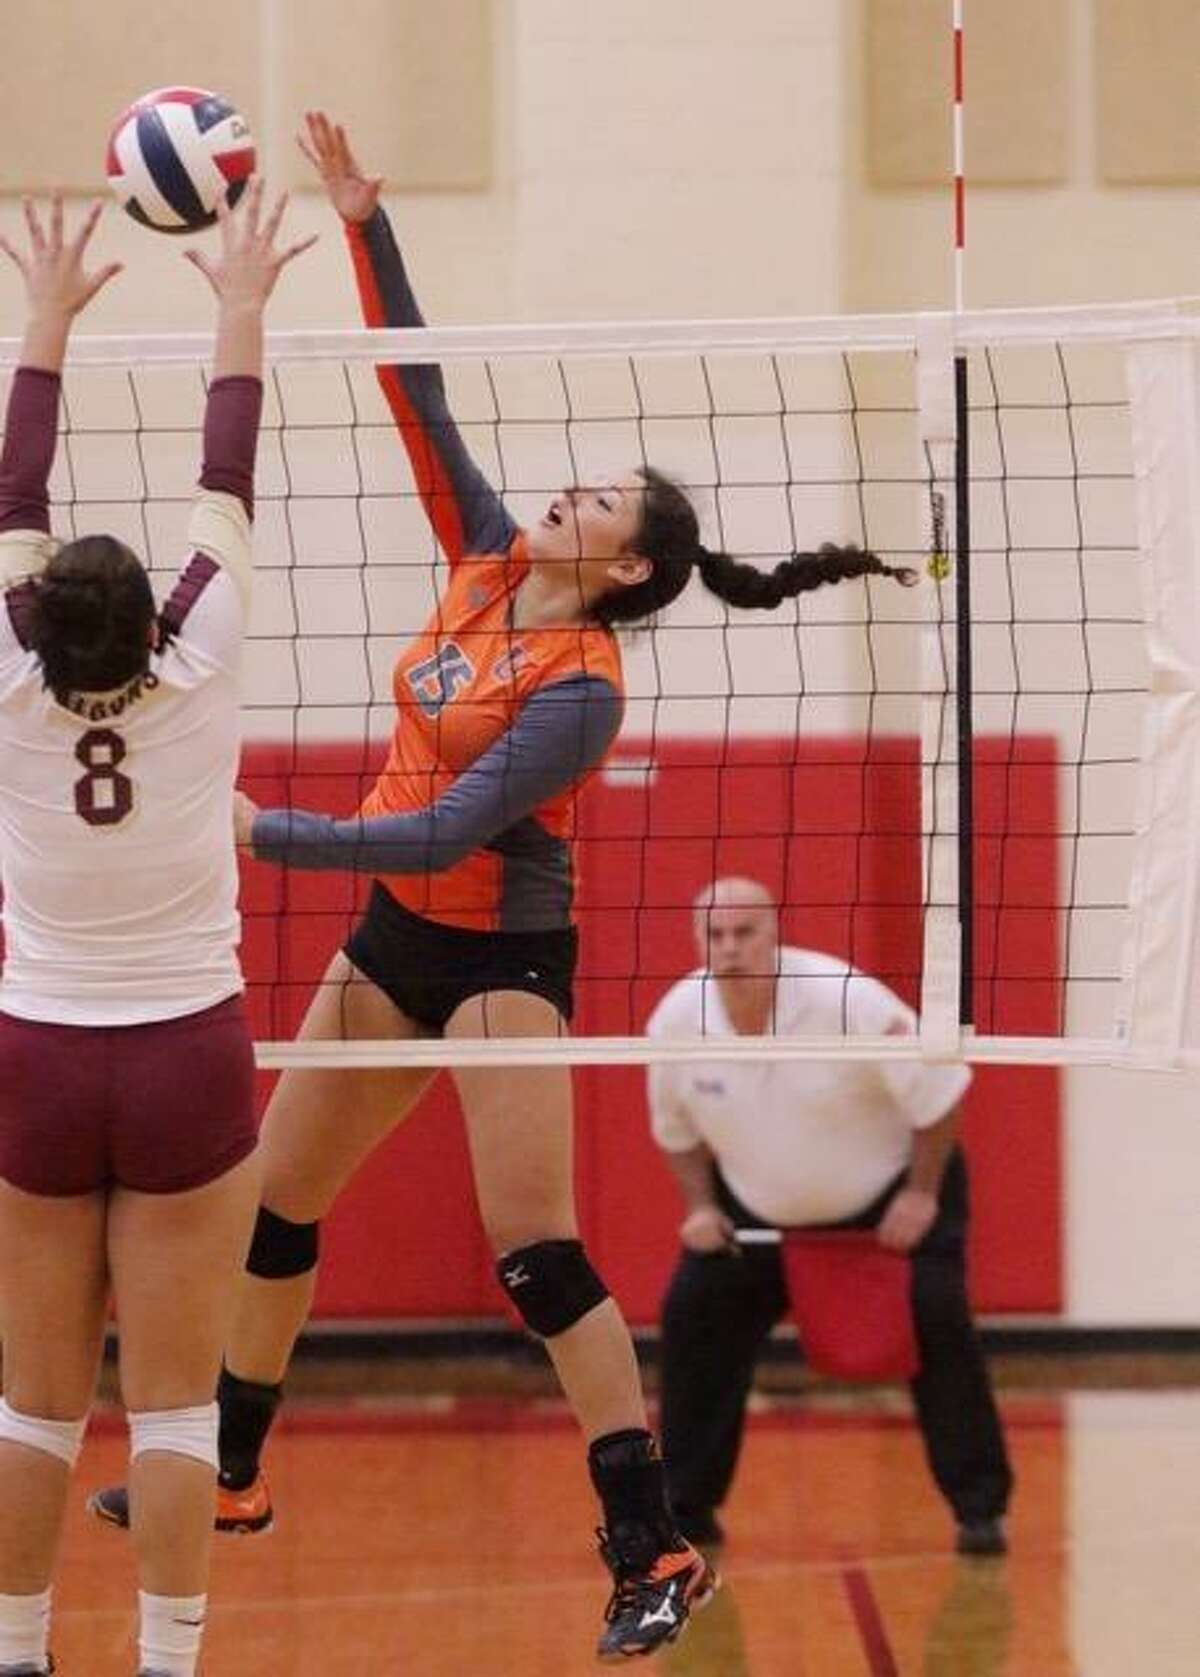 The 16th annual Bosom Buddies All-Star Games will take place Sunday at St. Augustine. United’s District 29-6A Most Outstanding Hitter for two straight seasons in Isela Murillo and 18 others will face off as the volleyball All-Star game begins at 2 p.m.